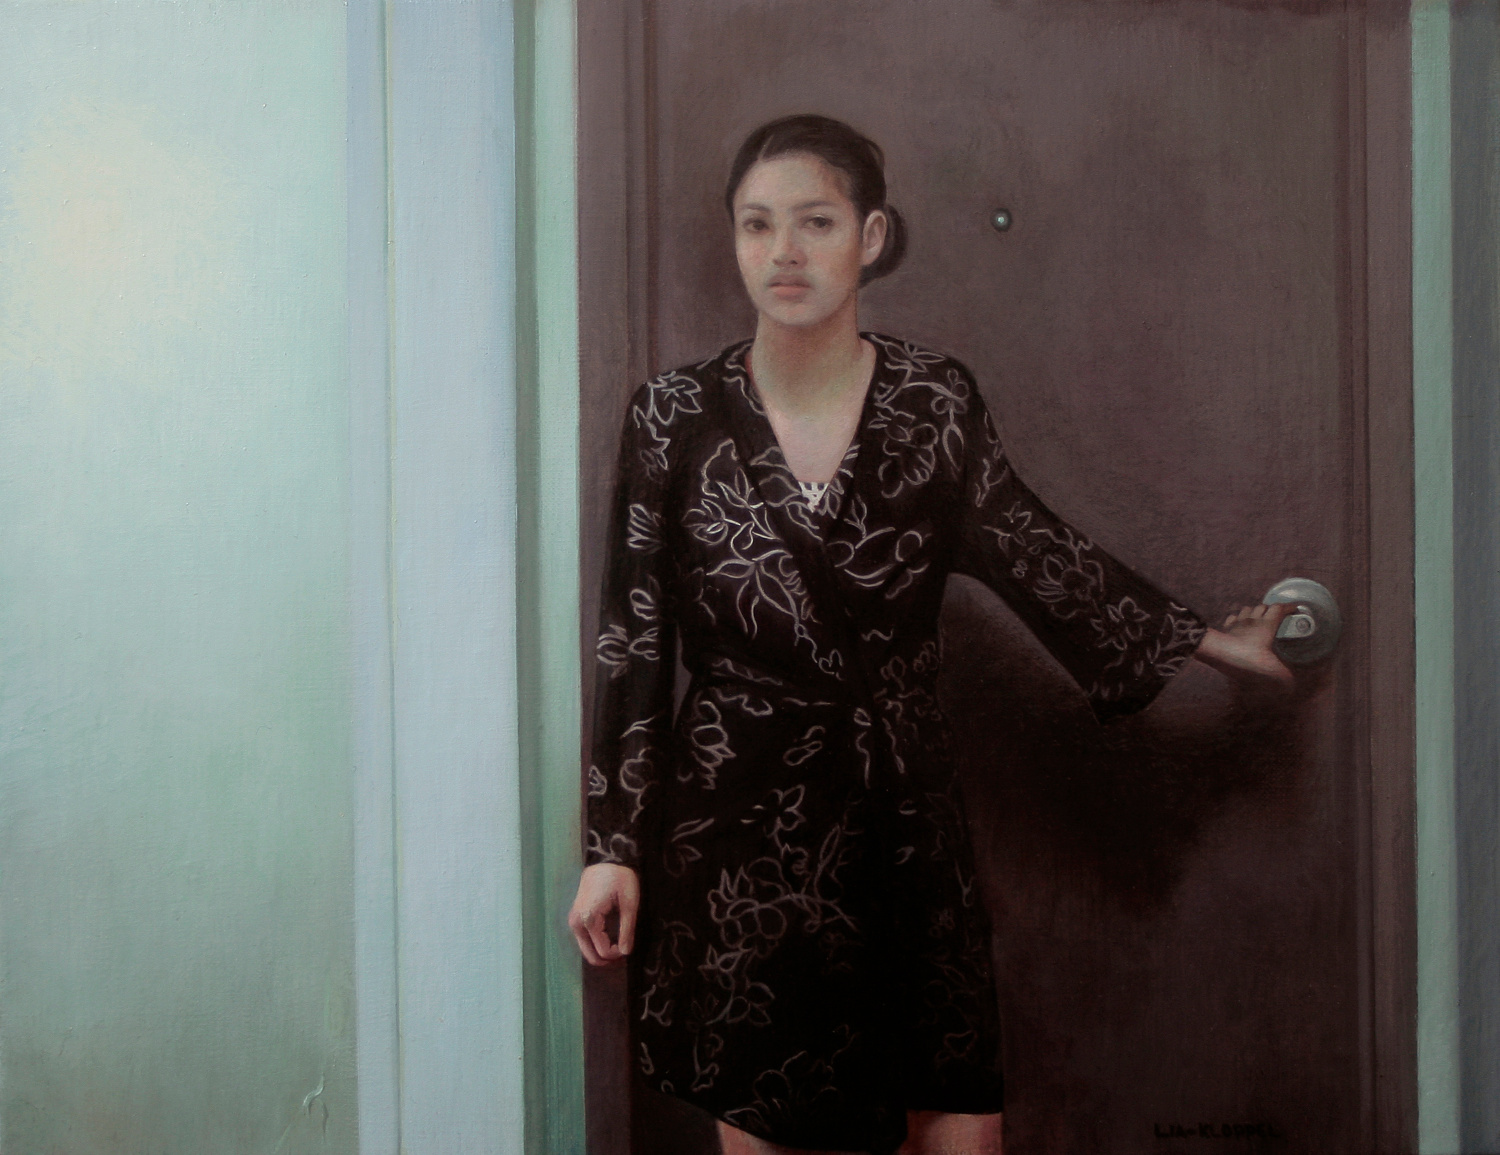   Peephole , 2014, Oil on linen, 8 x 11.5 inches, Private collection 